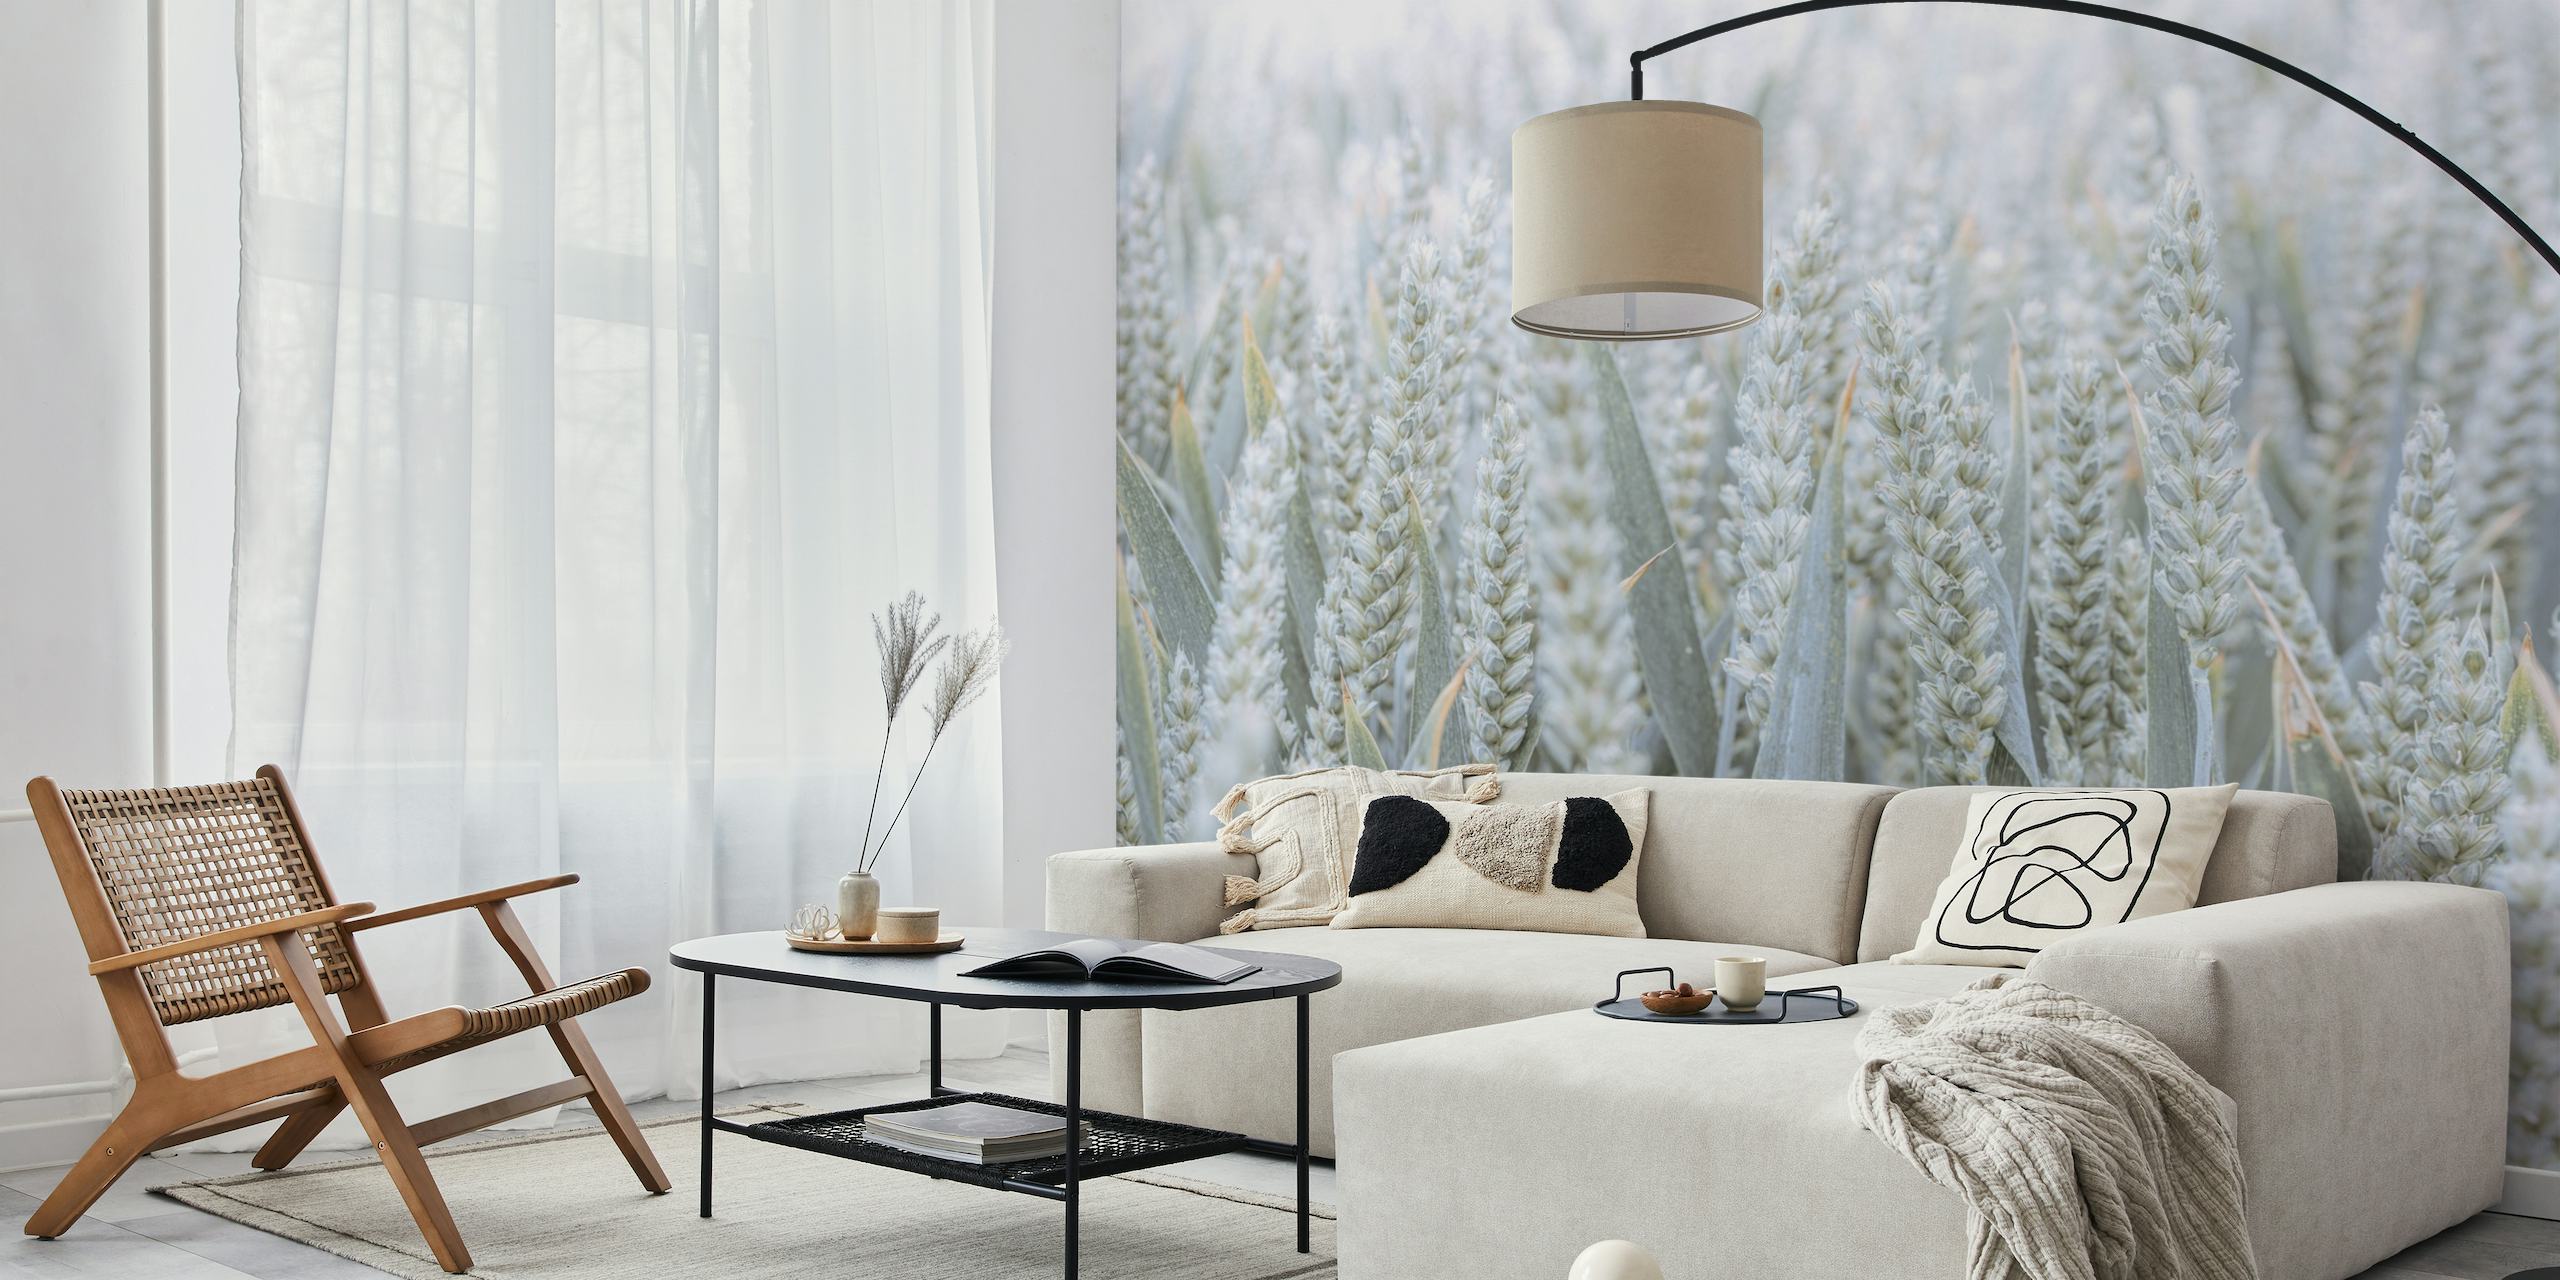 Wheat Field wall mural showing a close-up view of wheat stalks in soft beige and white tones creating a serene atmosphere.